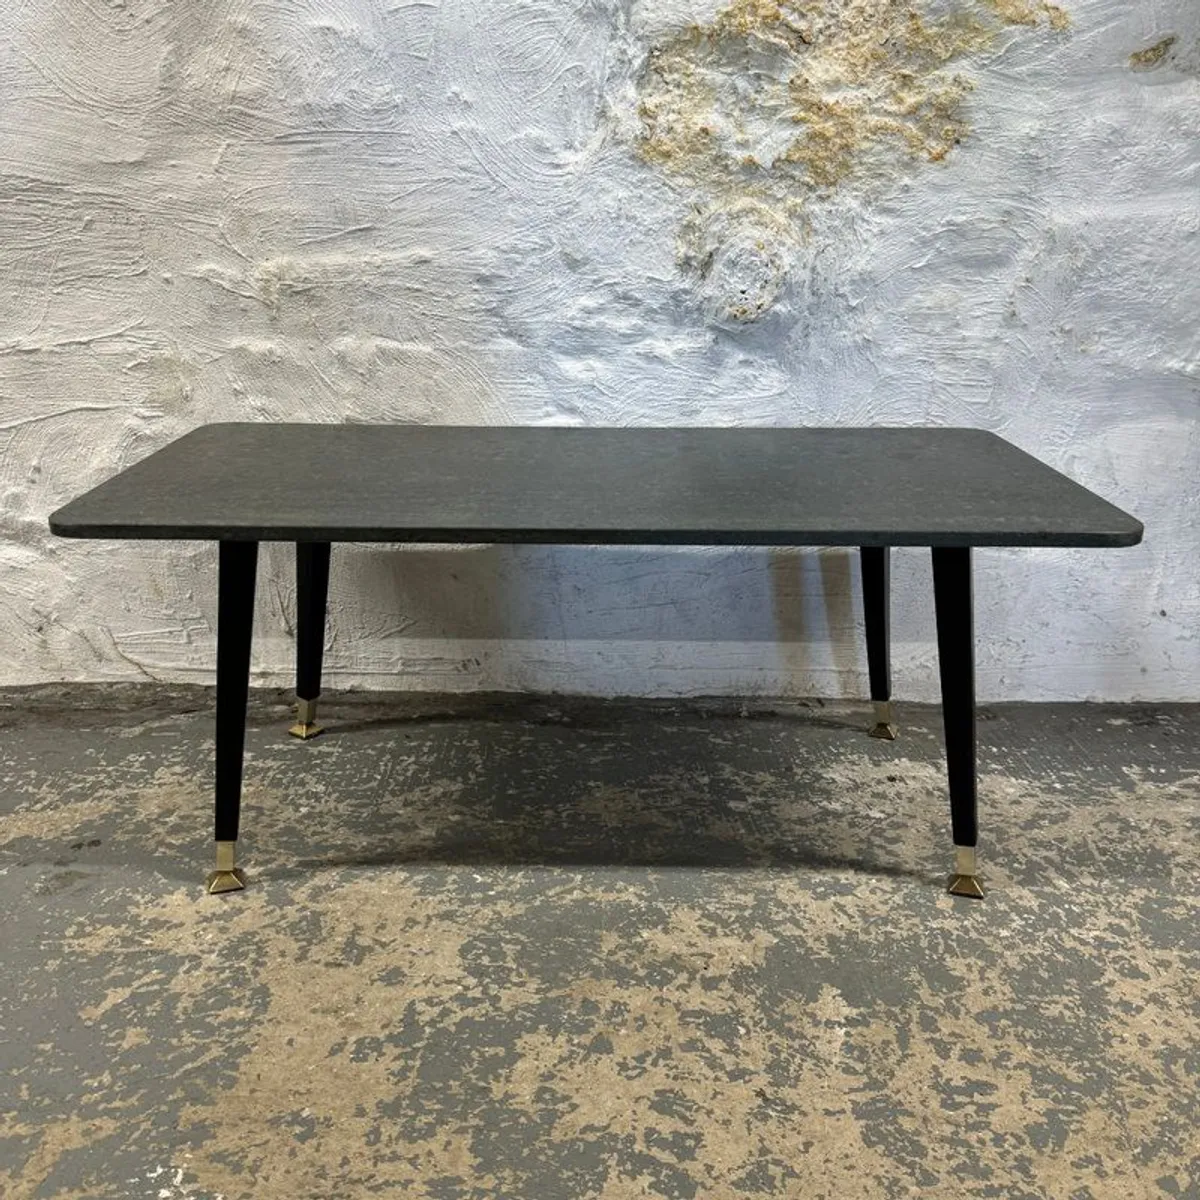 Mid Century Modern Coffee Table With Granite Top - Image 1